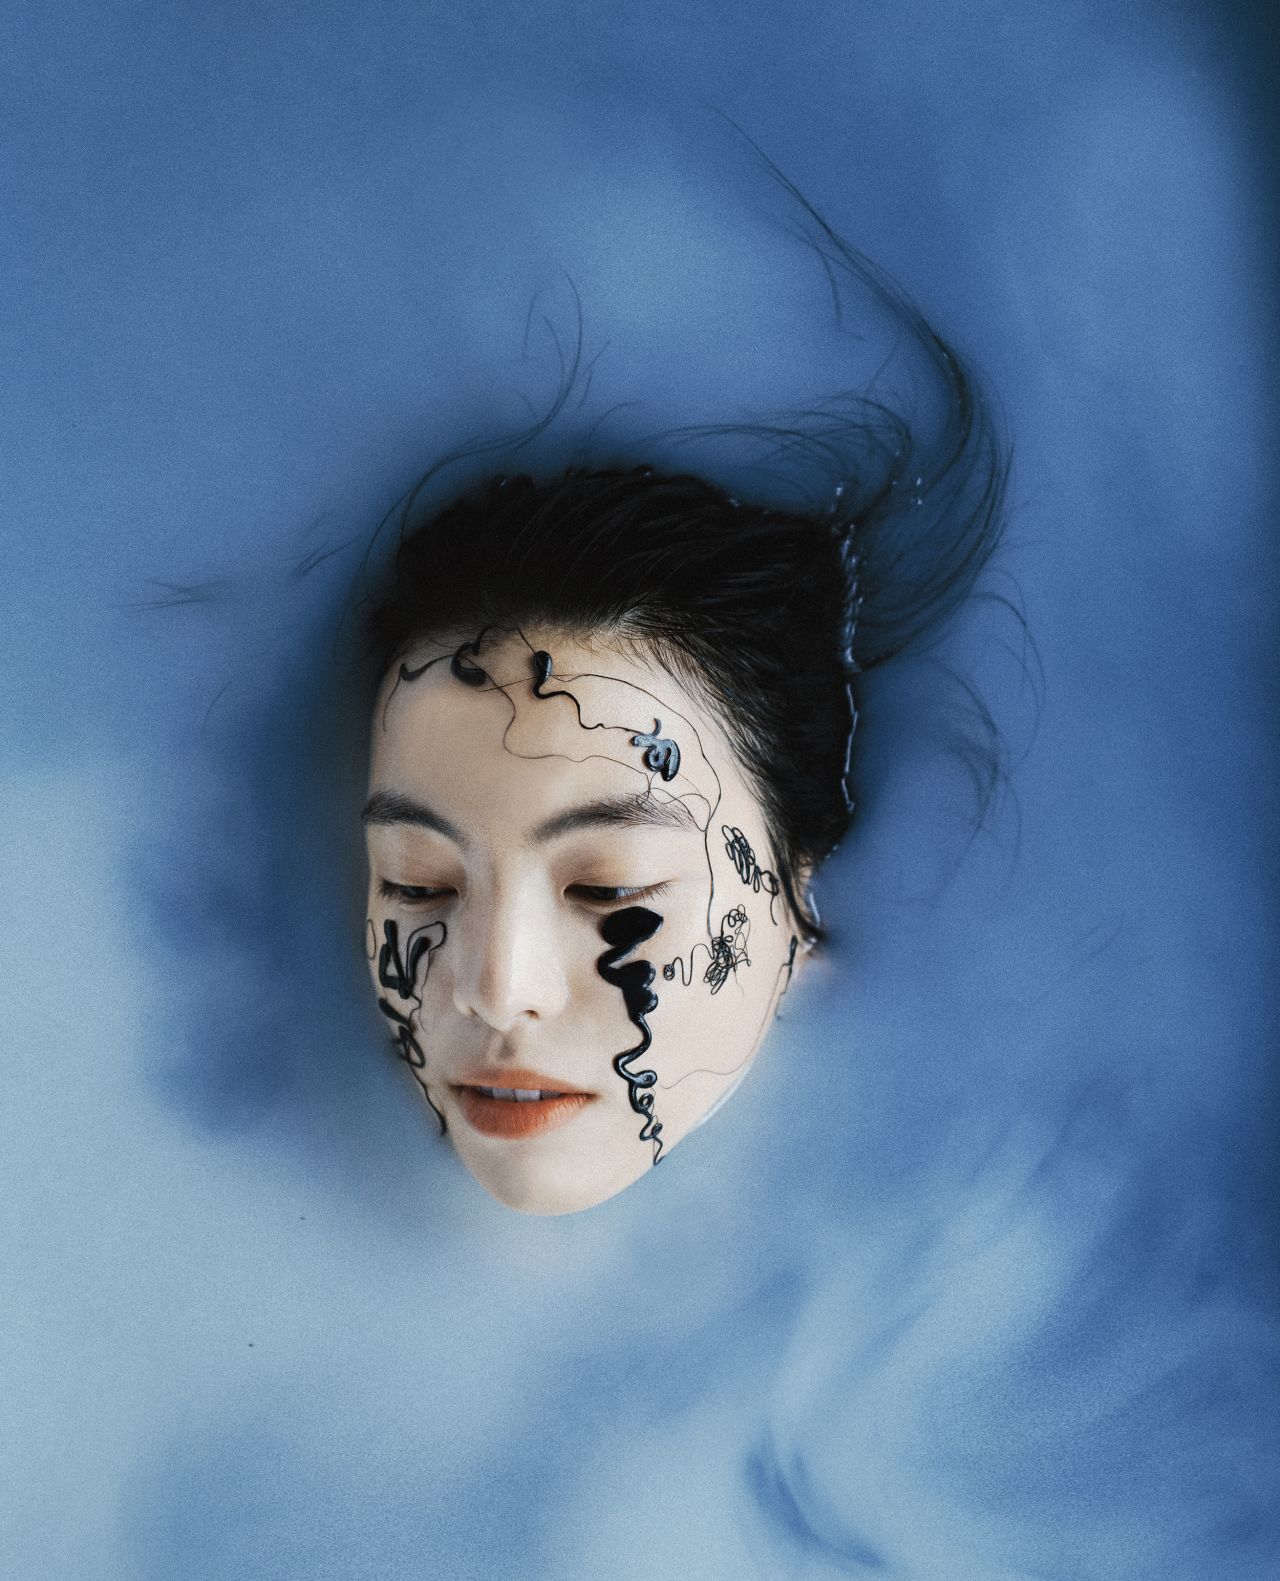 The Malaysian photographer is inspired by the aesthetics of Chinese opera, as seen in on day 70 of her year-long project.